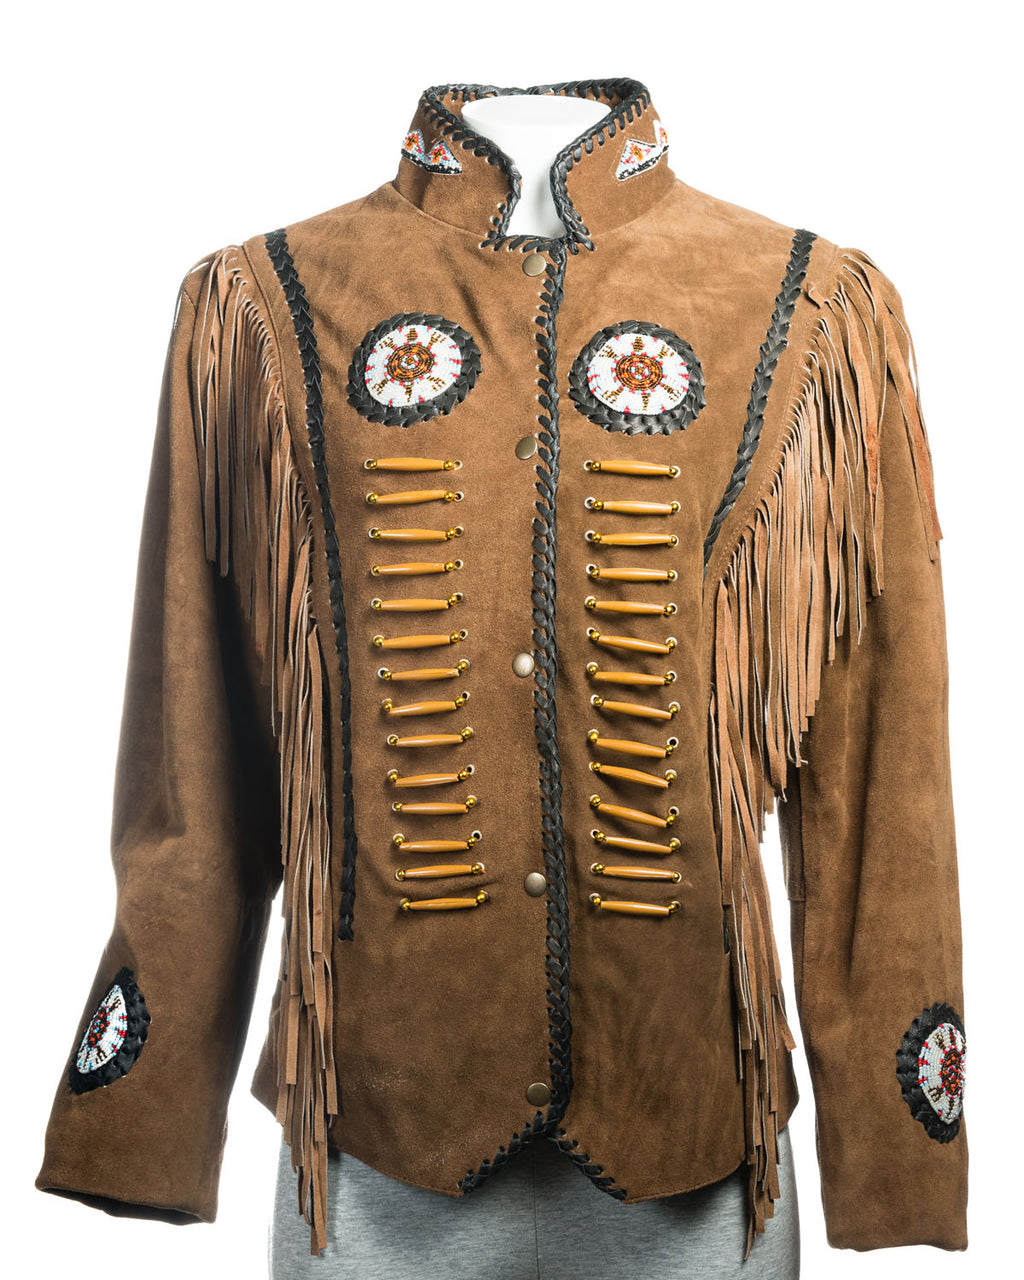 Women's Suede Native American Style Jacket with Fringe and Beads - Navajo Ladies